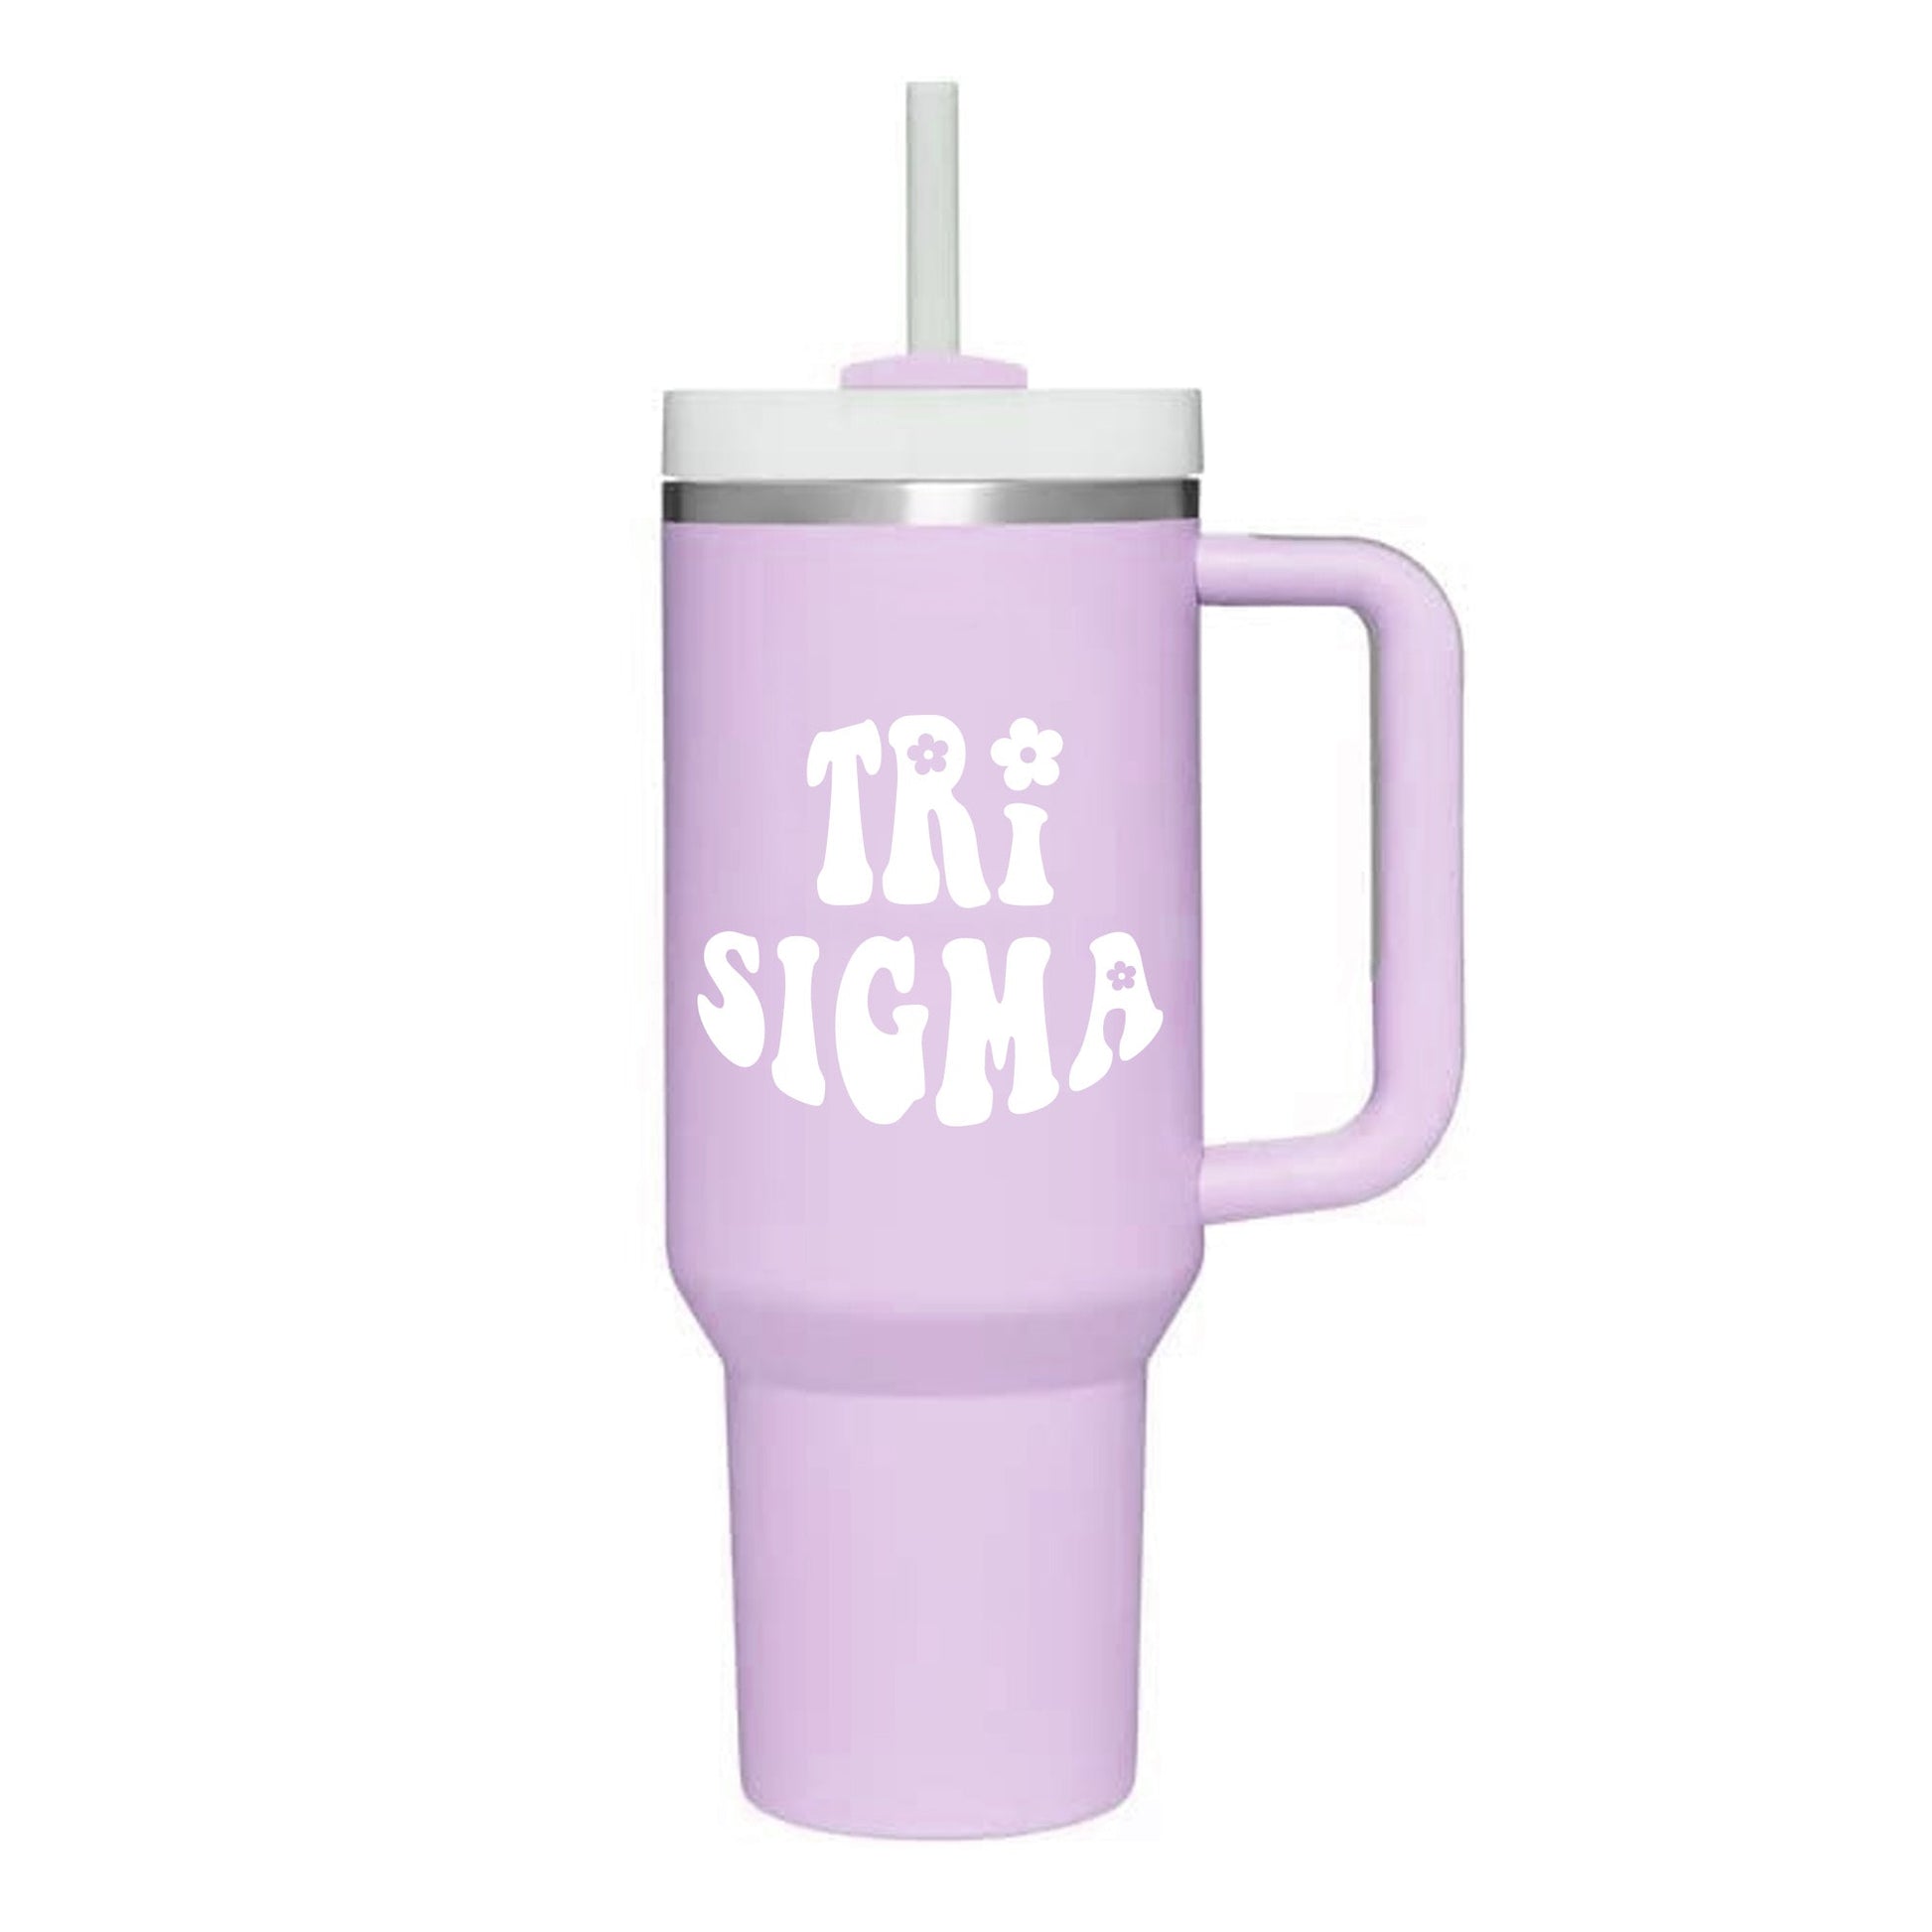 Tri Sigma 40oz Stainless Steel Tumbler with Handle - Virginia Book Company